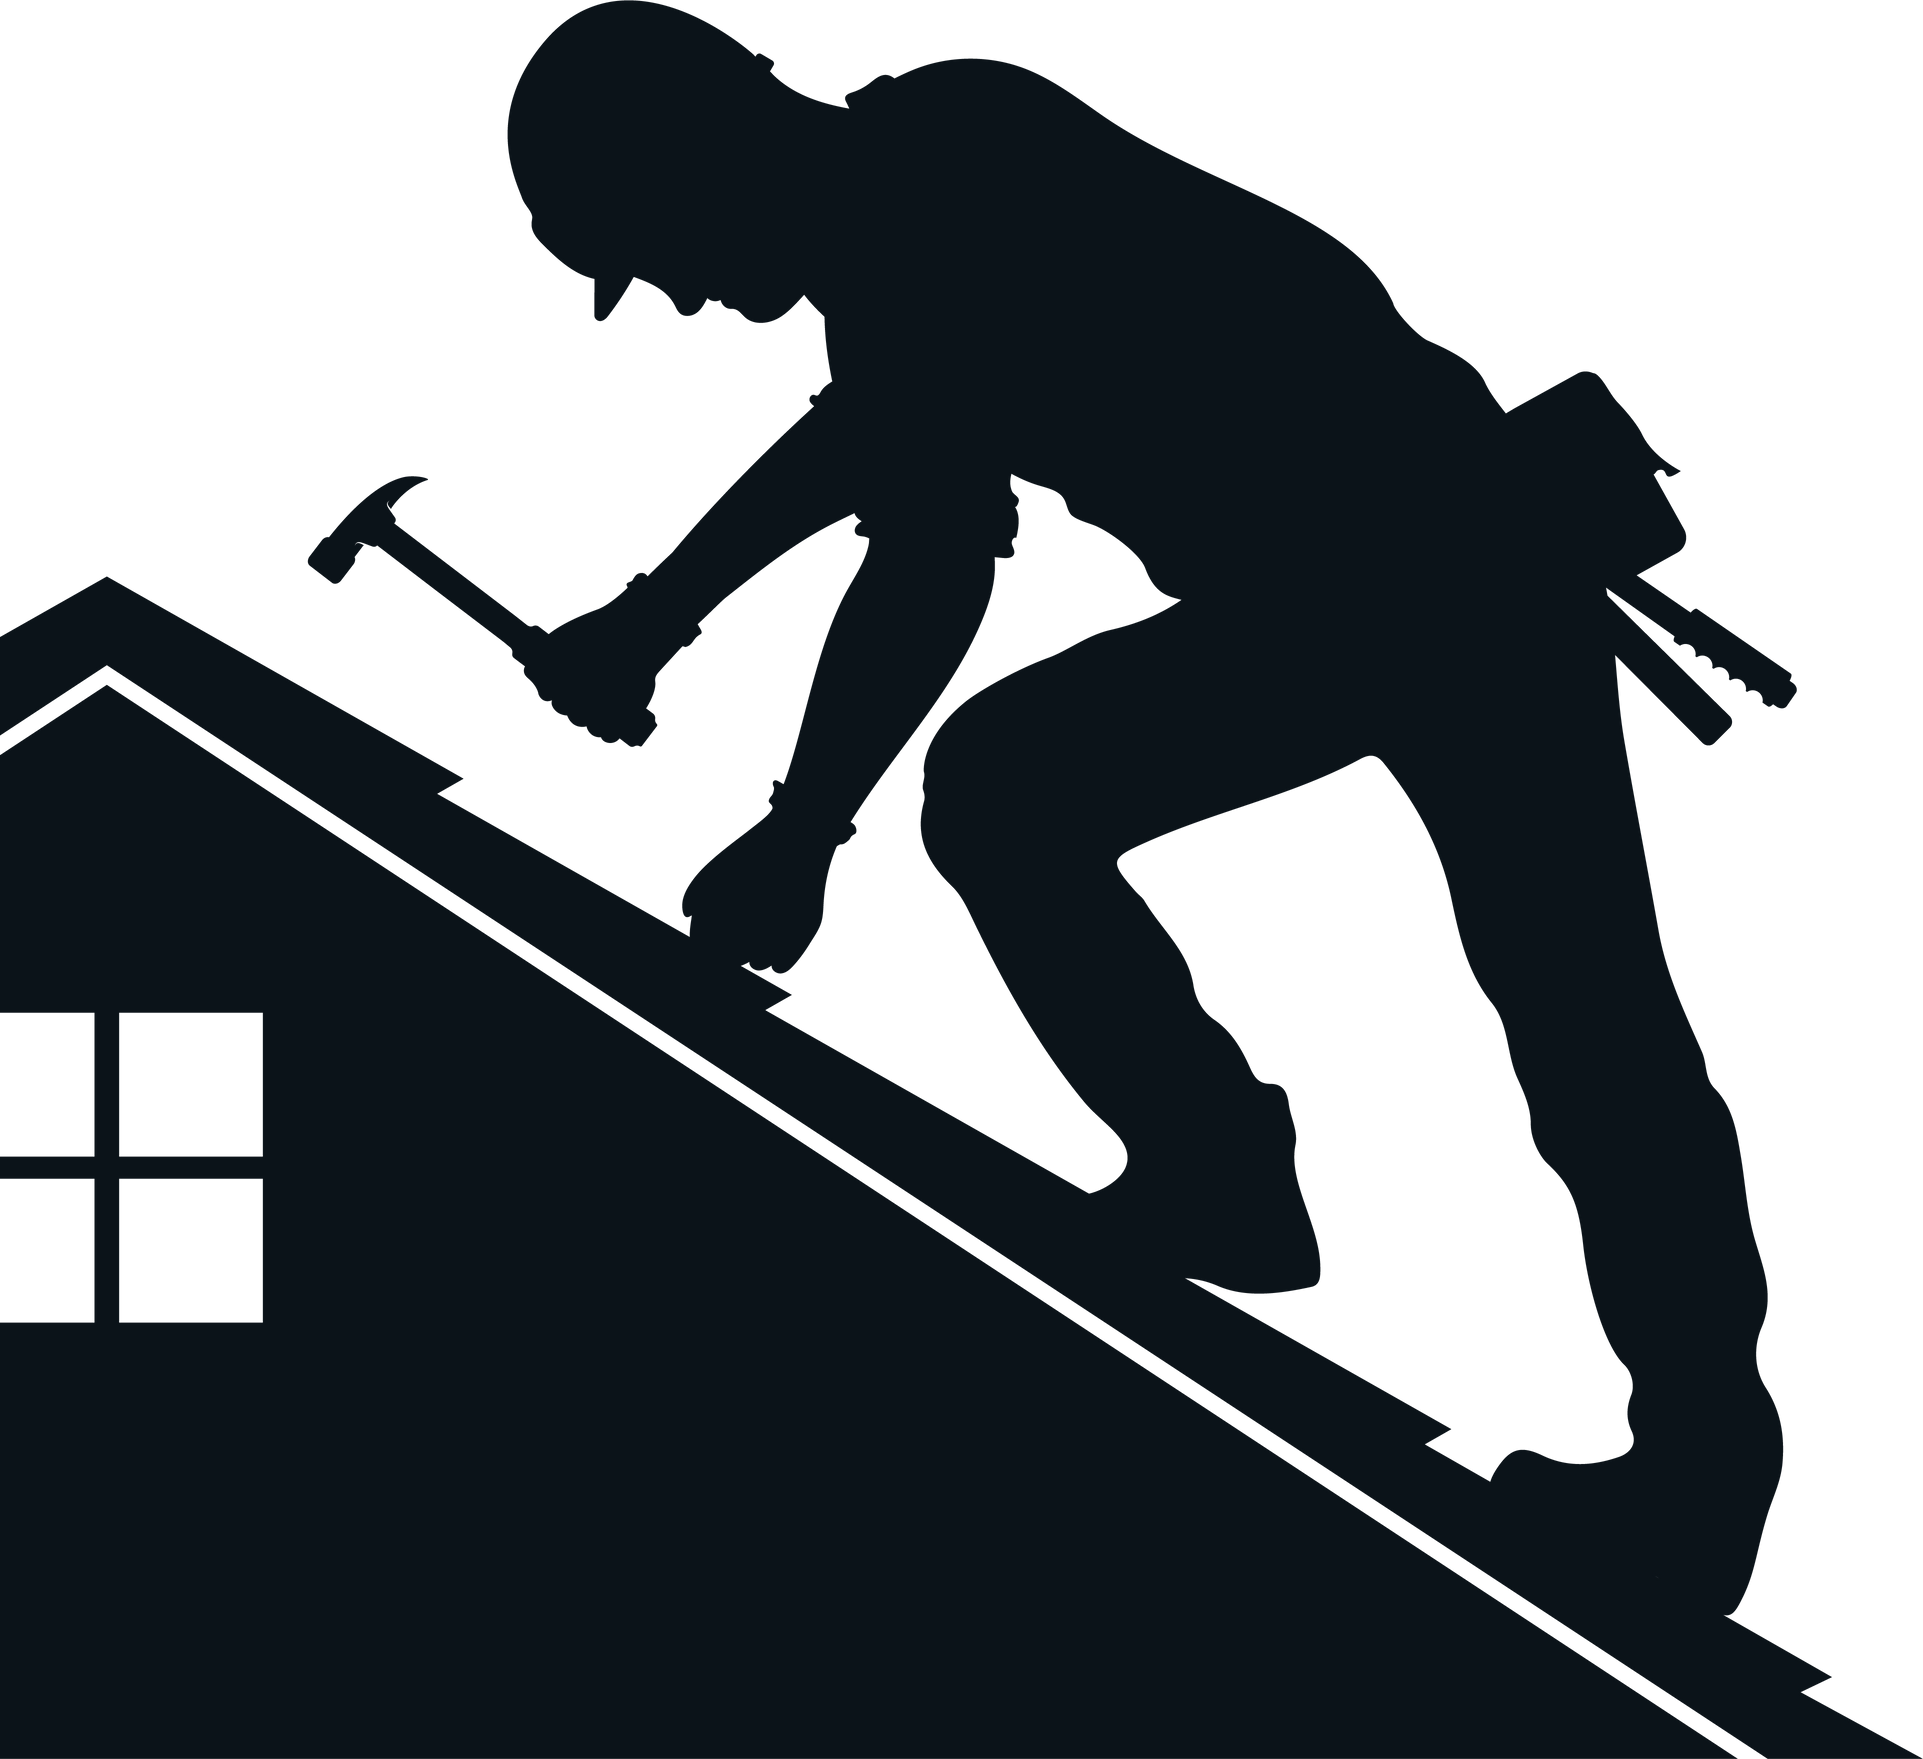 Roofer silhouette on roof with hammer tool, design for roofing